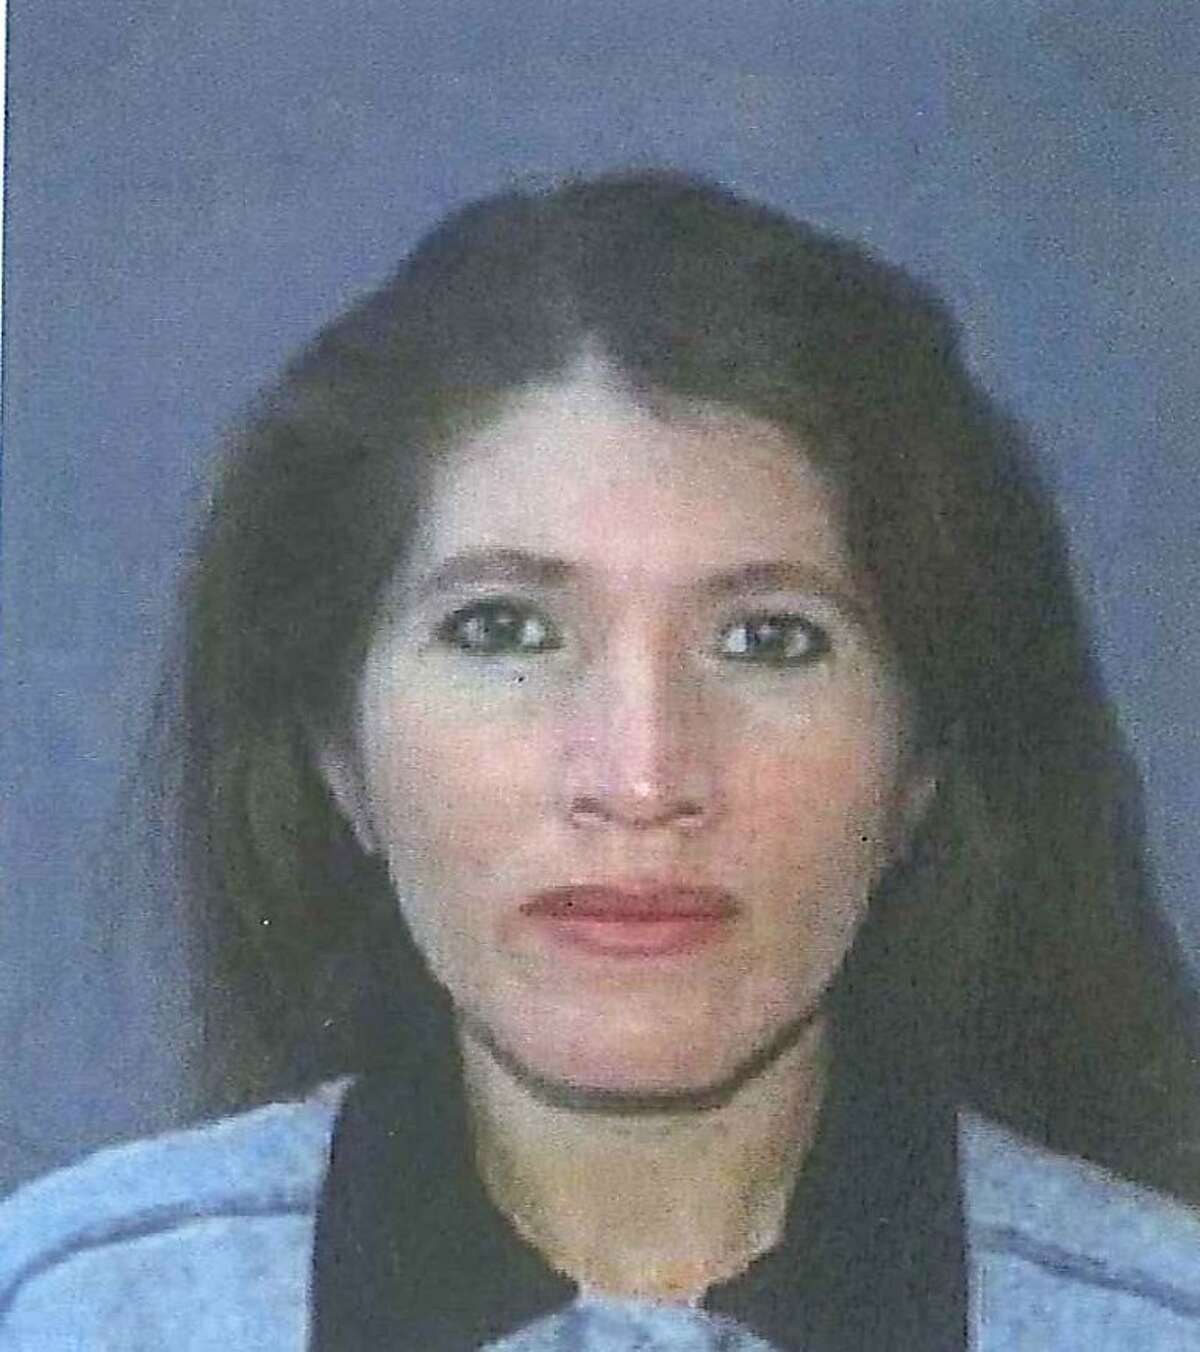 Martha Gutierrez of Gilroy, the missing mother of murder-suicide suspect Abel Gutierrez, who police say killed himself and his 11-year-old sister March 14, 2011. Authorities fear he may have harmed Martha Gutierrez as well.